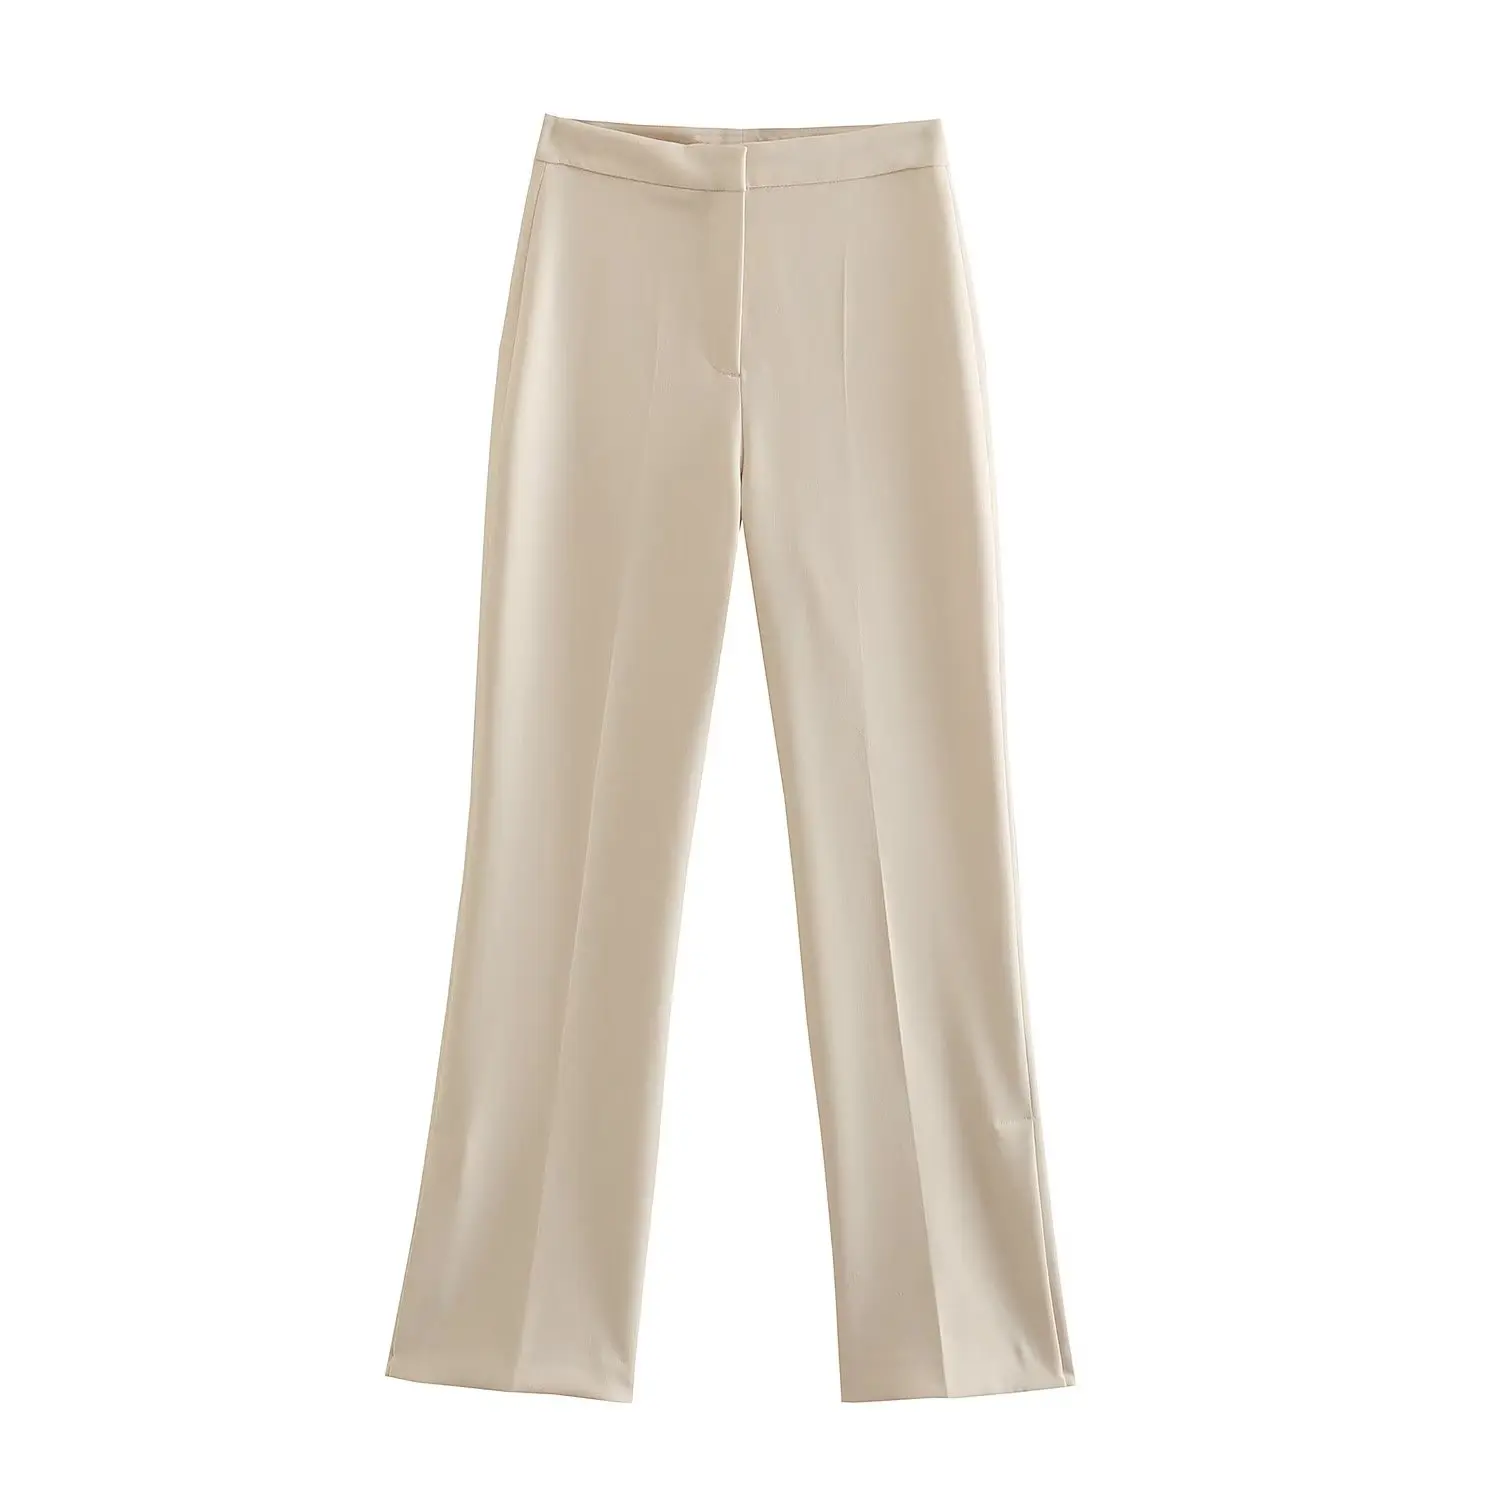 Pb&Za Women's Clothing Wholesale New 35 Color Casual Trousers